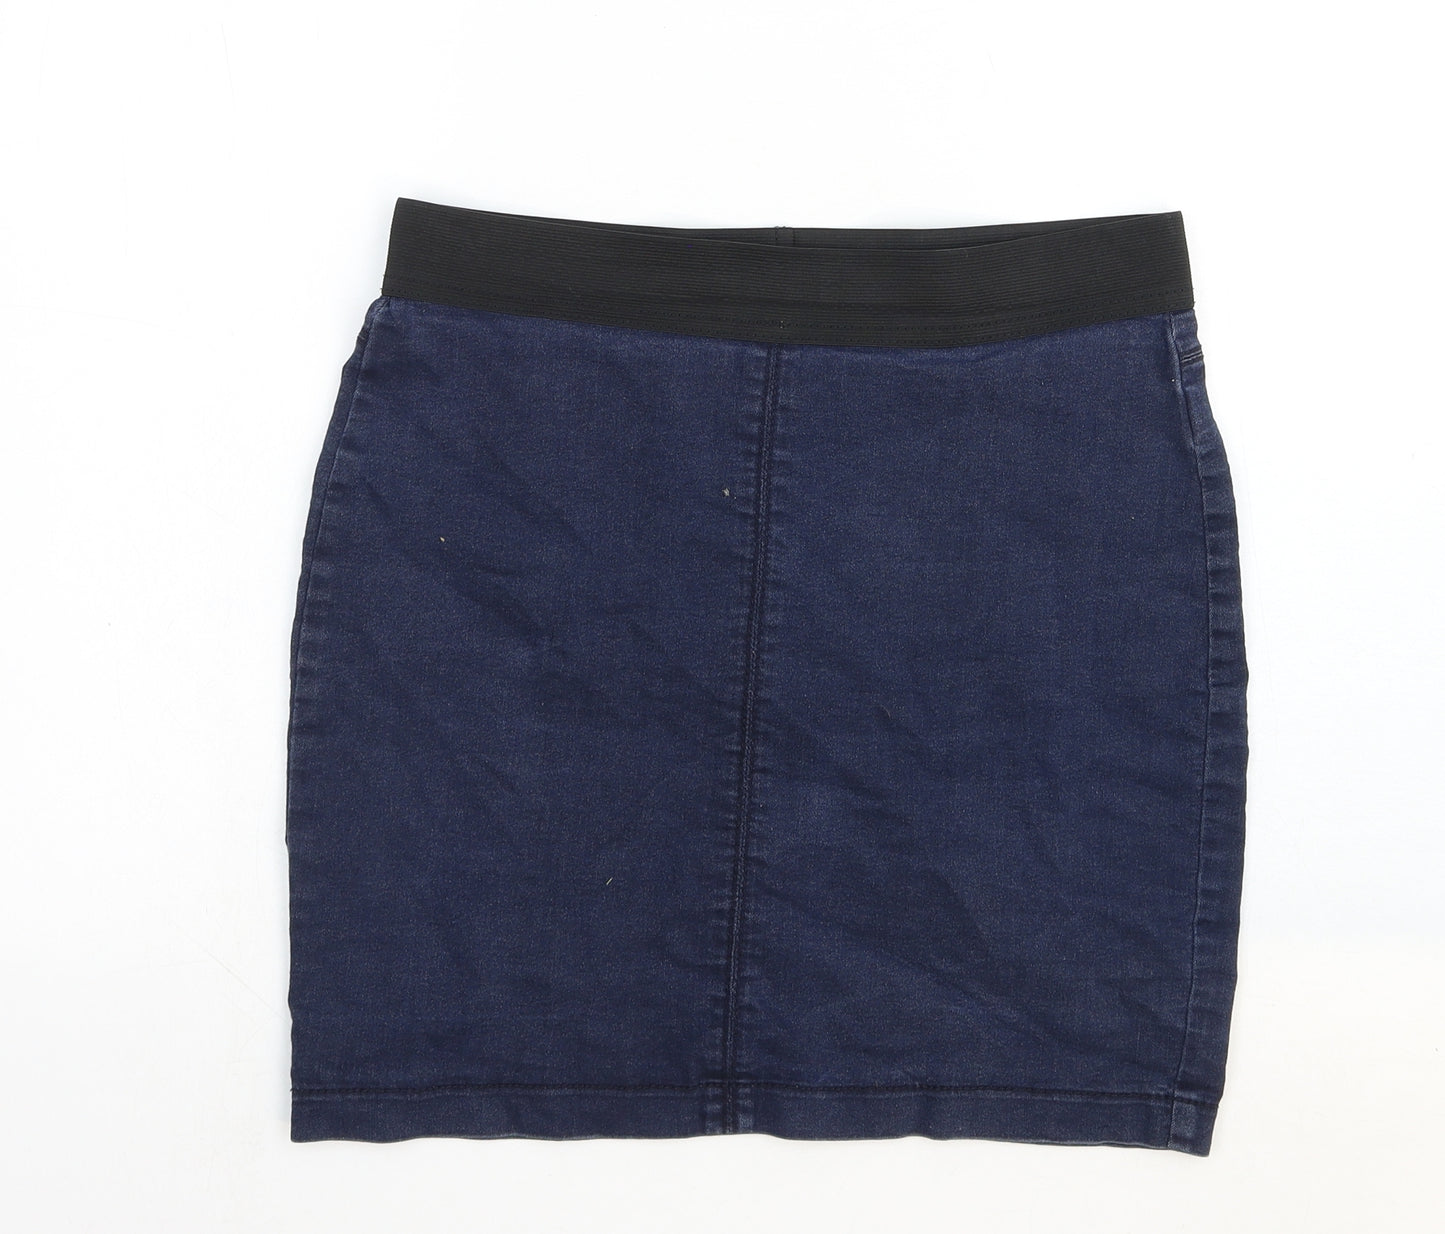 Marks and Spencer Womens Blue Cotton A-Line Skirt Size 10